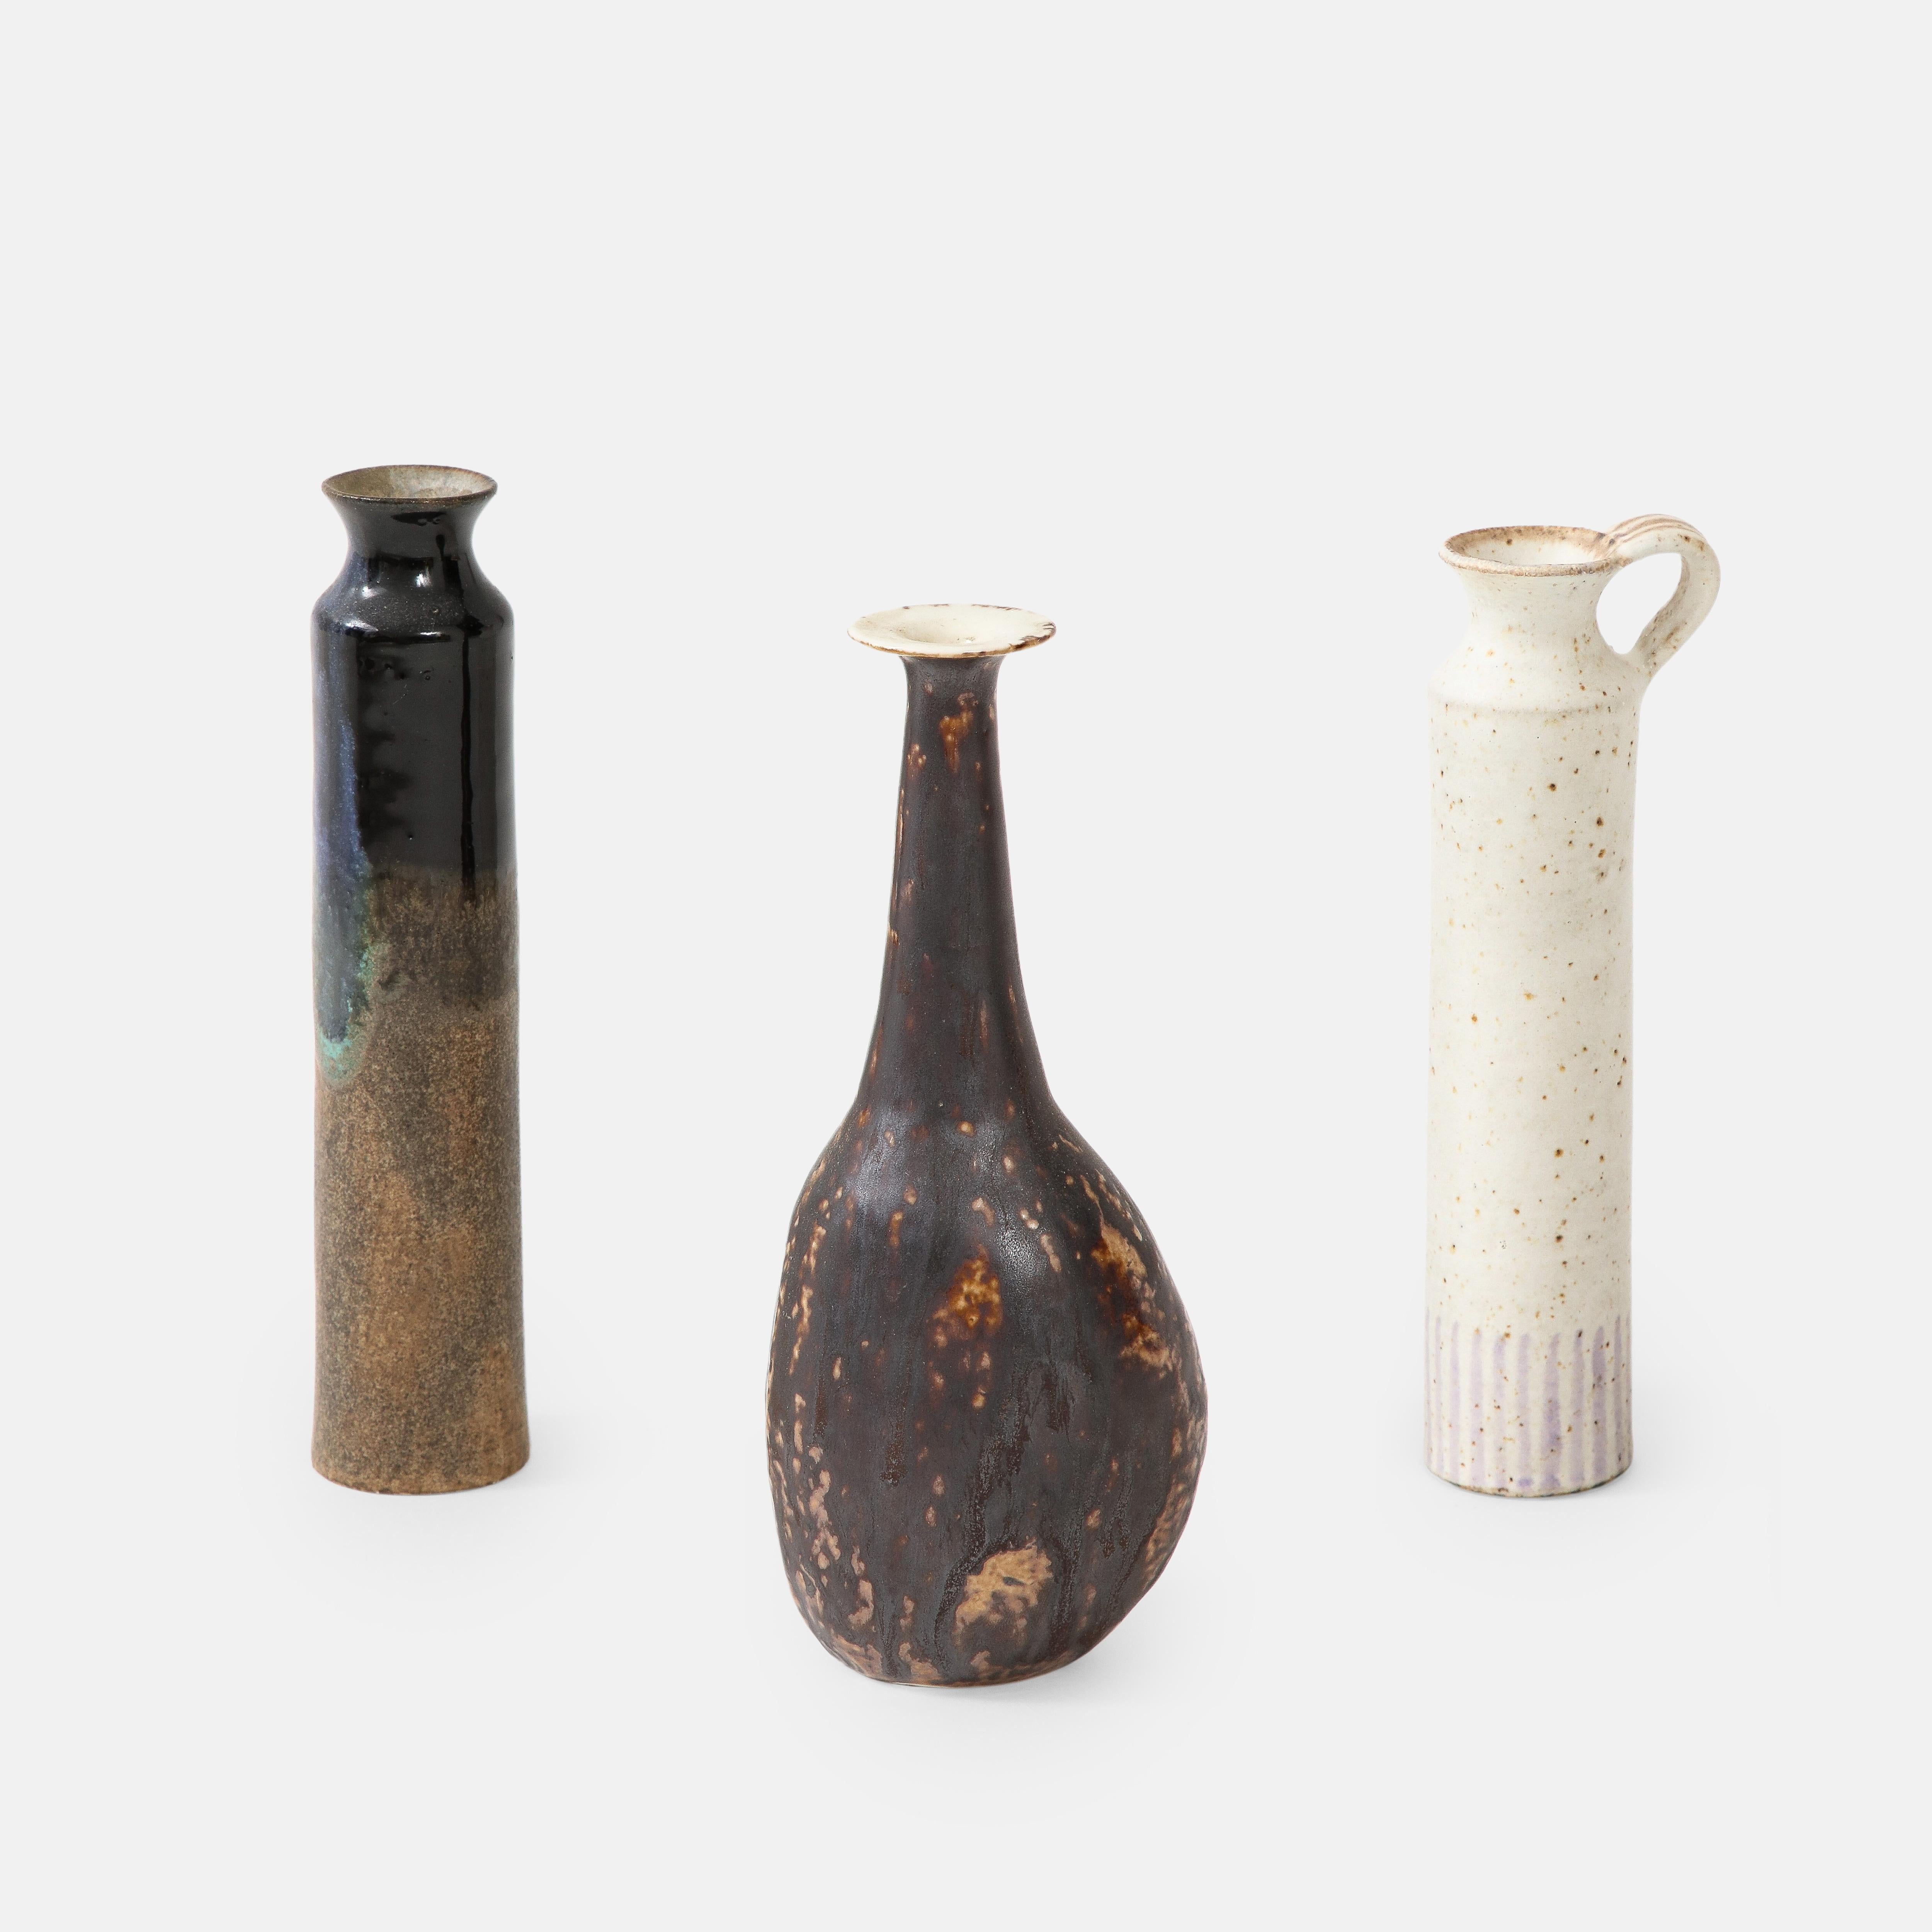 Bruno Gambone set of three small stoneware or ceramic vases or vessels, Italy, 1970s.   This beautiful set of small stoneware vases are grouped together nicely with contrasting and complimentary colored glazes and shapes but in similar sizes. 
